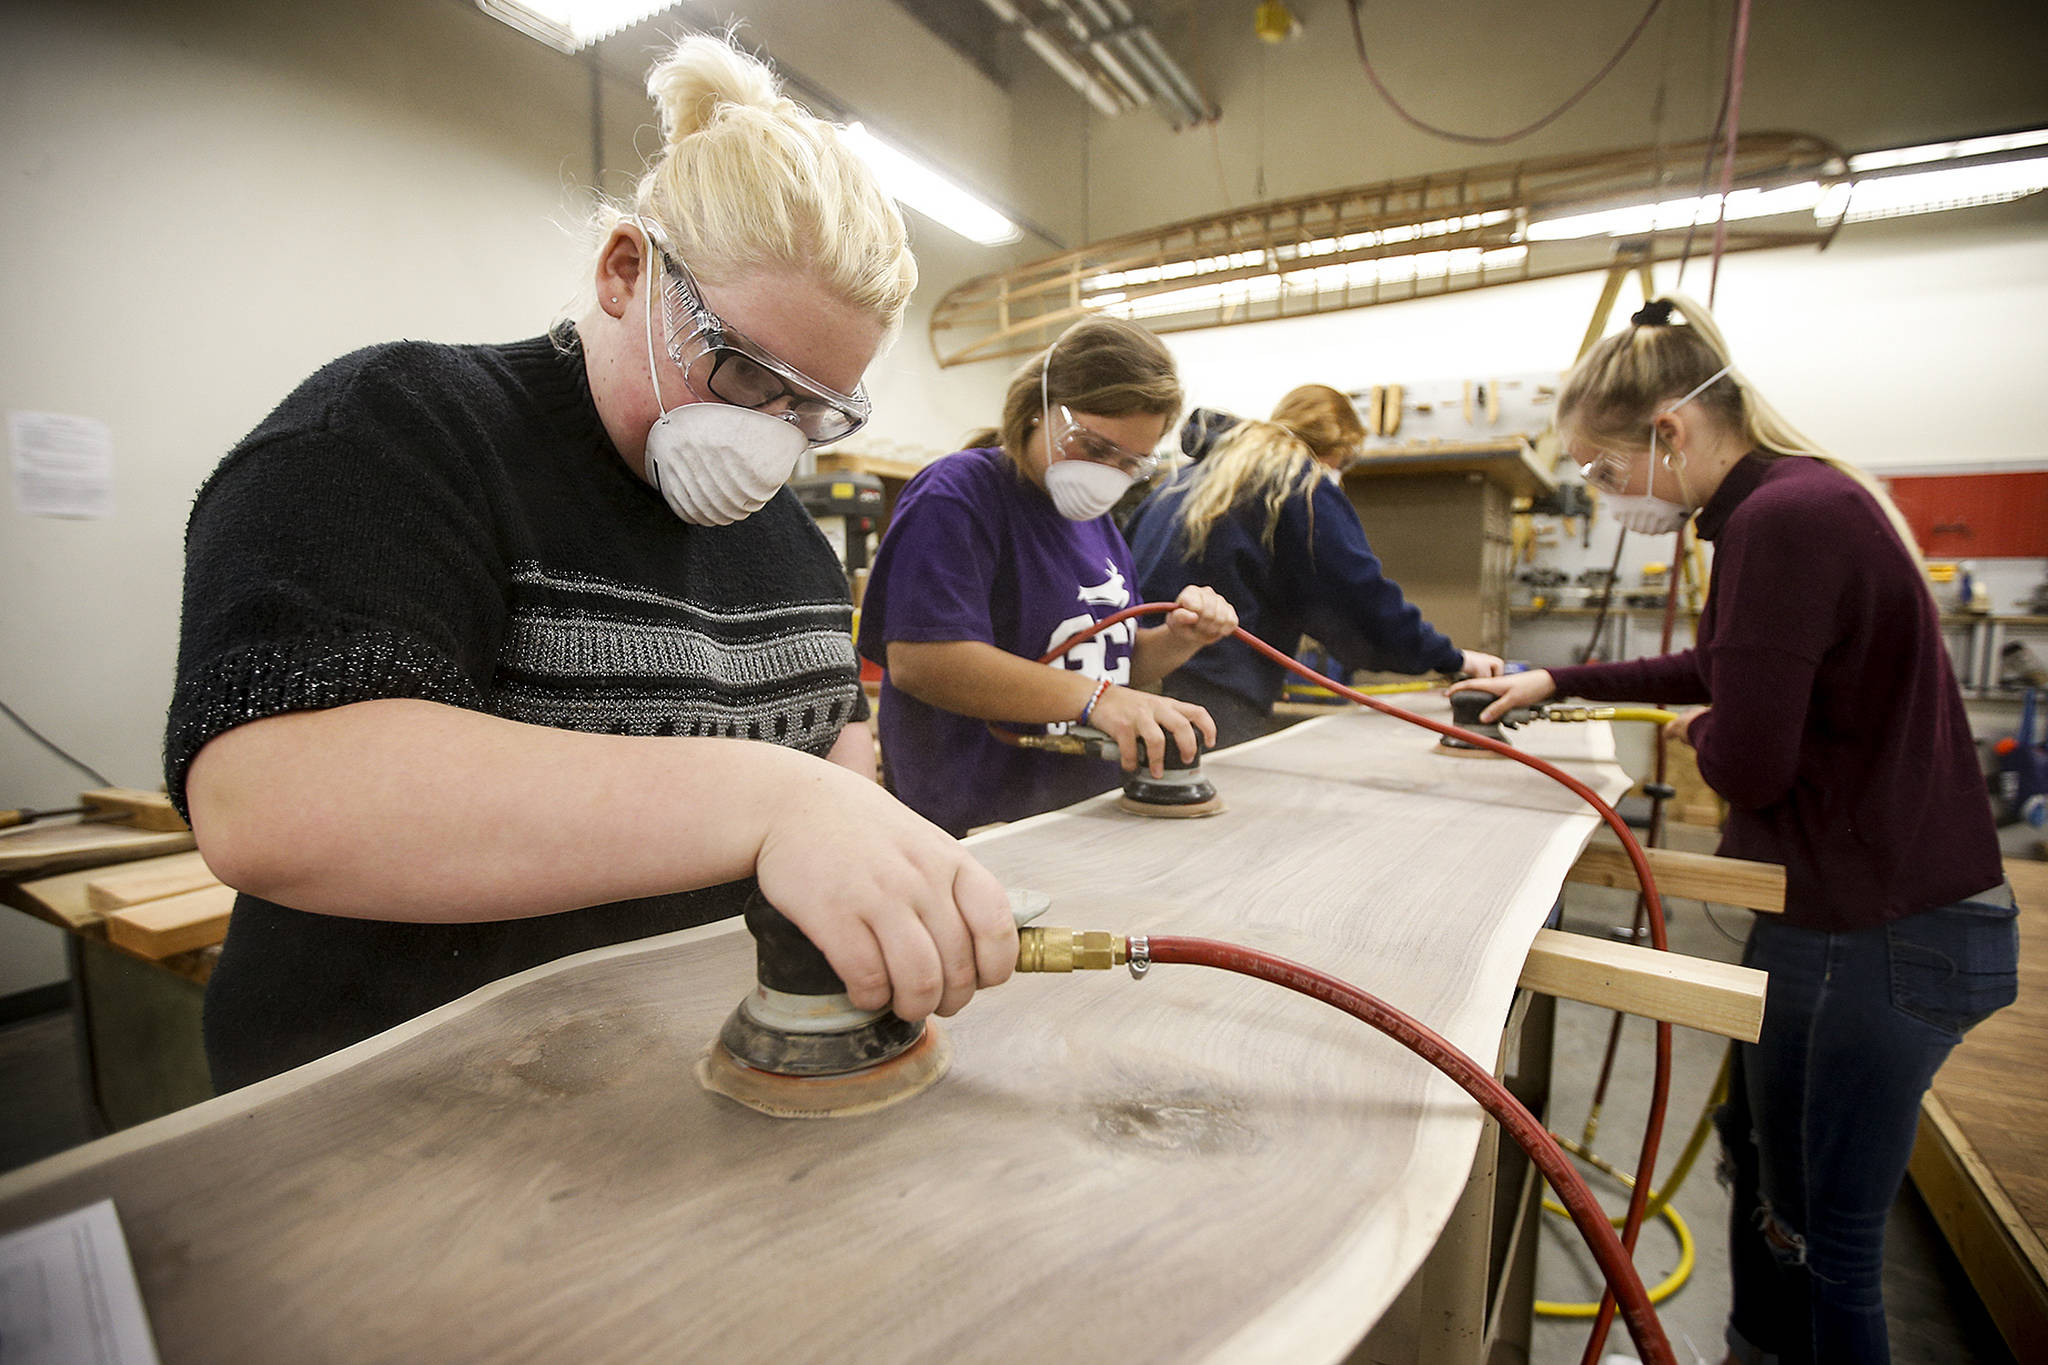 Sarah Krieg (left), sands a cut of wood that was harvested from an old walnut tree that had been recently removed on the Snohomish High School campus. Krieg and other students at the school are working to create a sofa and table from the salvaged lumber. (Ian Terry / The Herald)